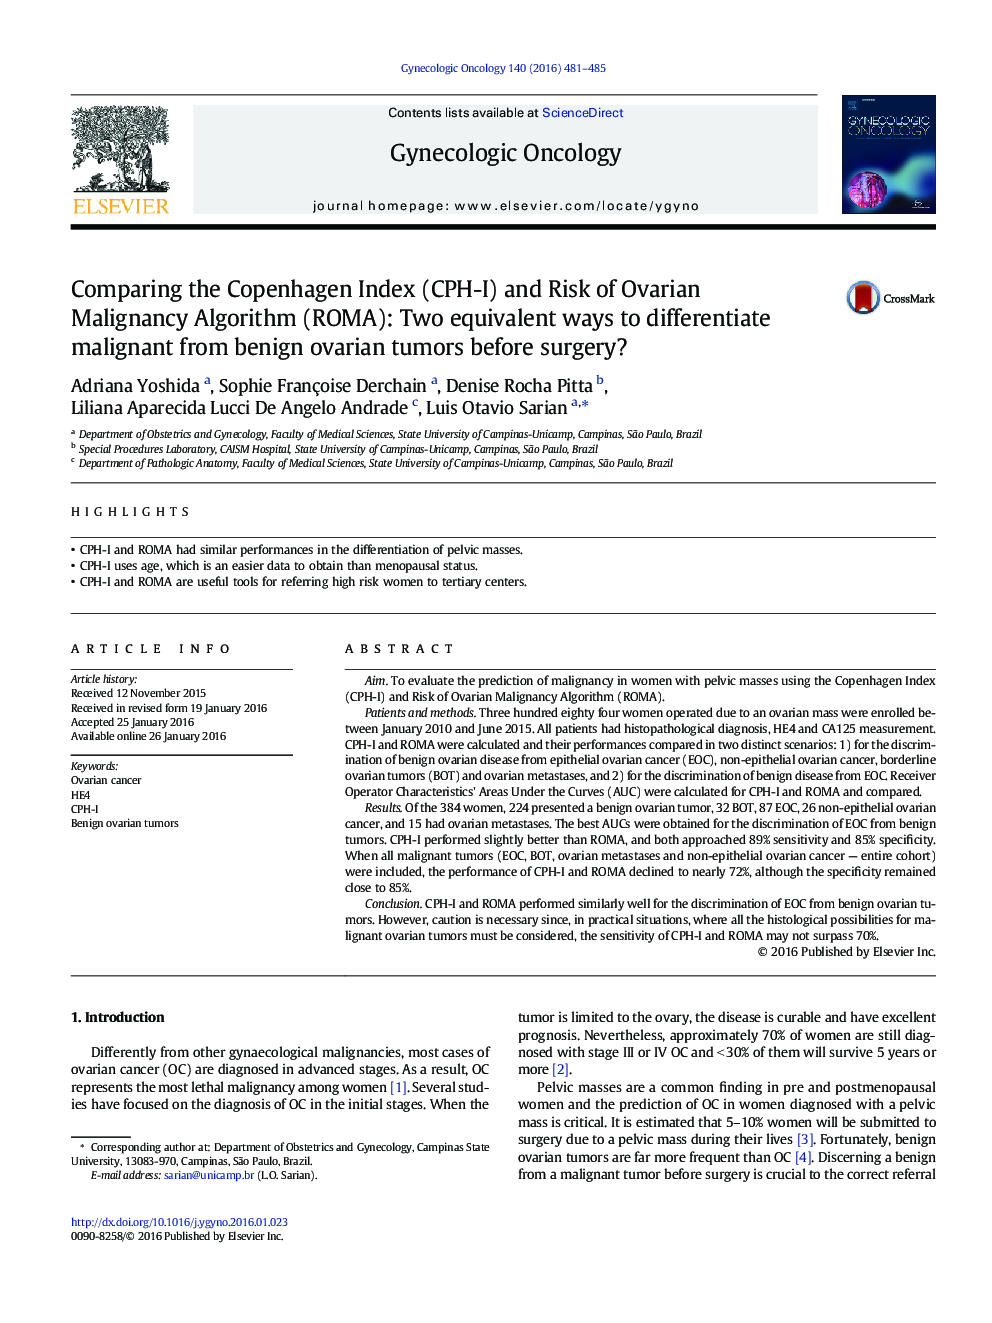 Comparing the Copenhagen Index (CPH-I) and Risk of Ovarian Malignancy Algorithm (ROMA): Two equivalent ways to differentiate malignant from benign ovarian tumors before surgery?